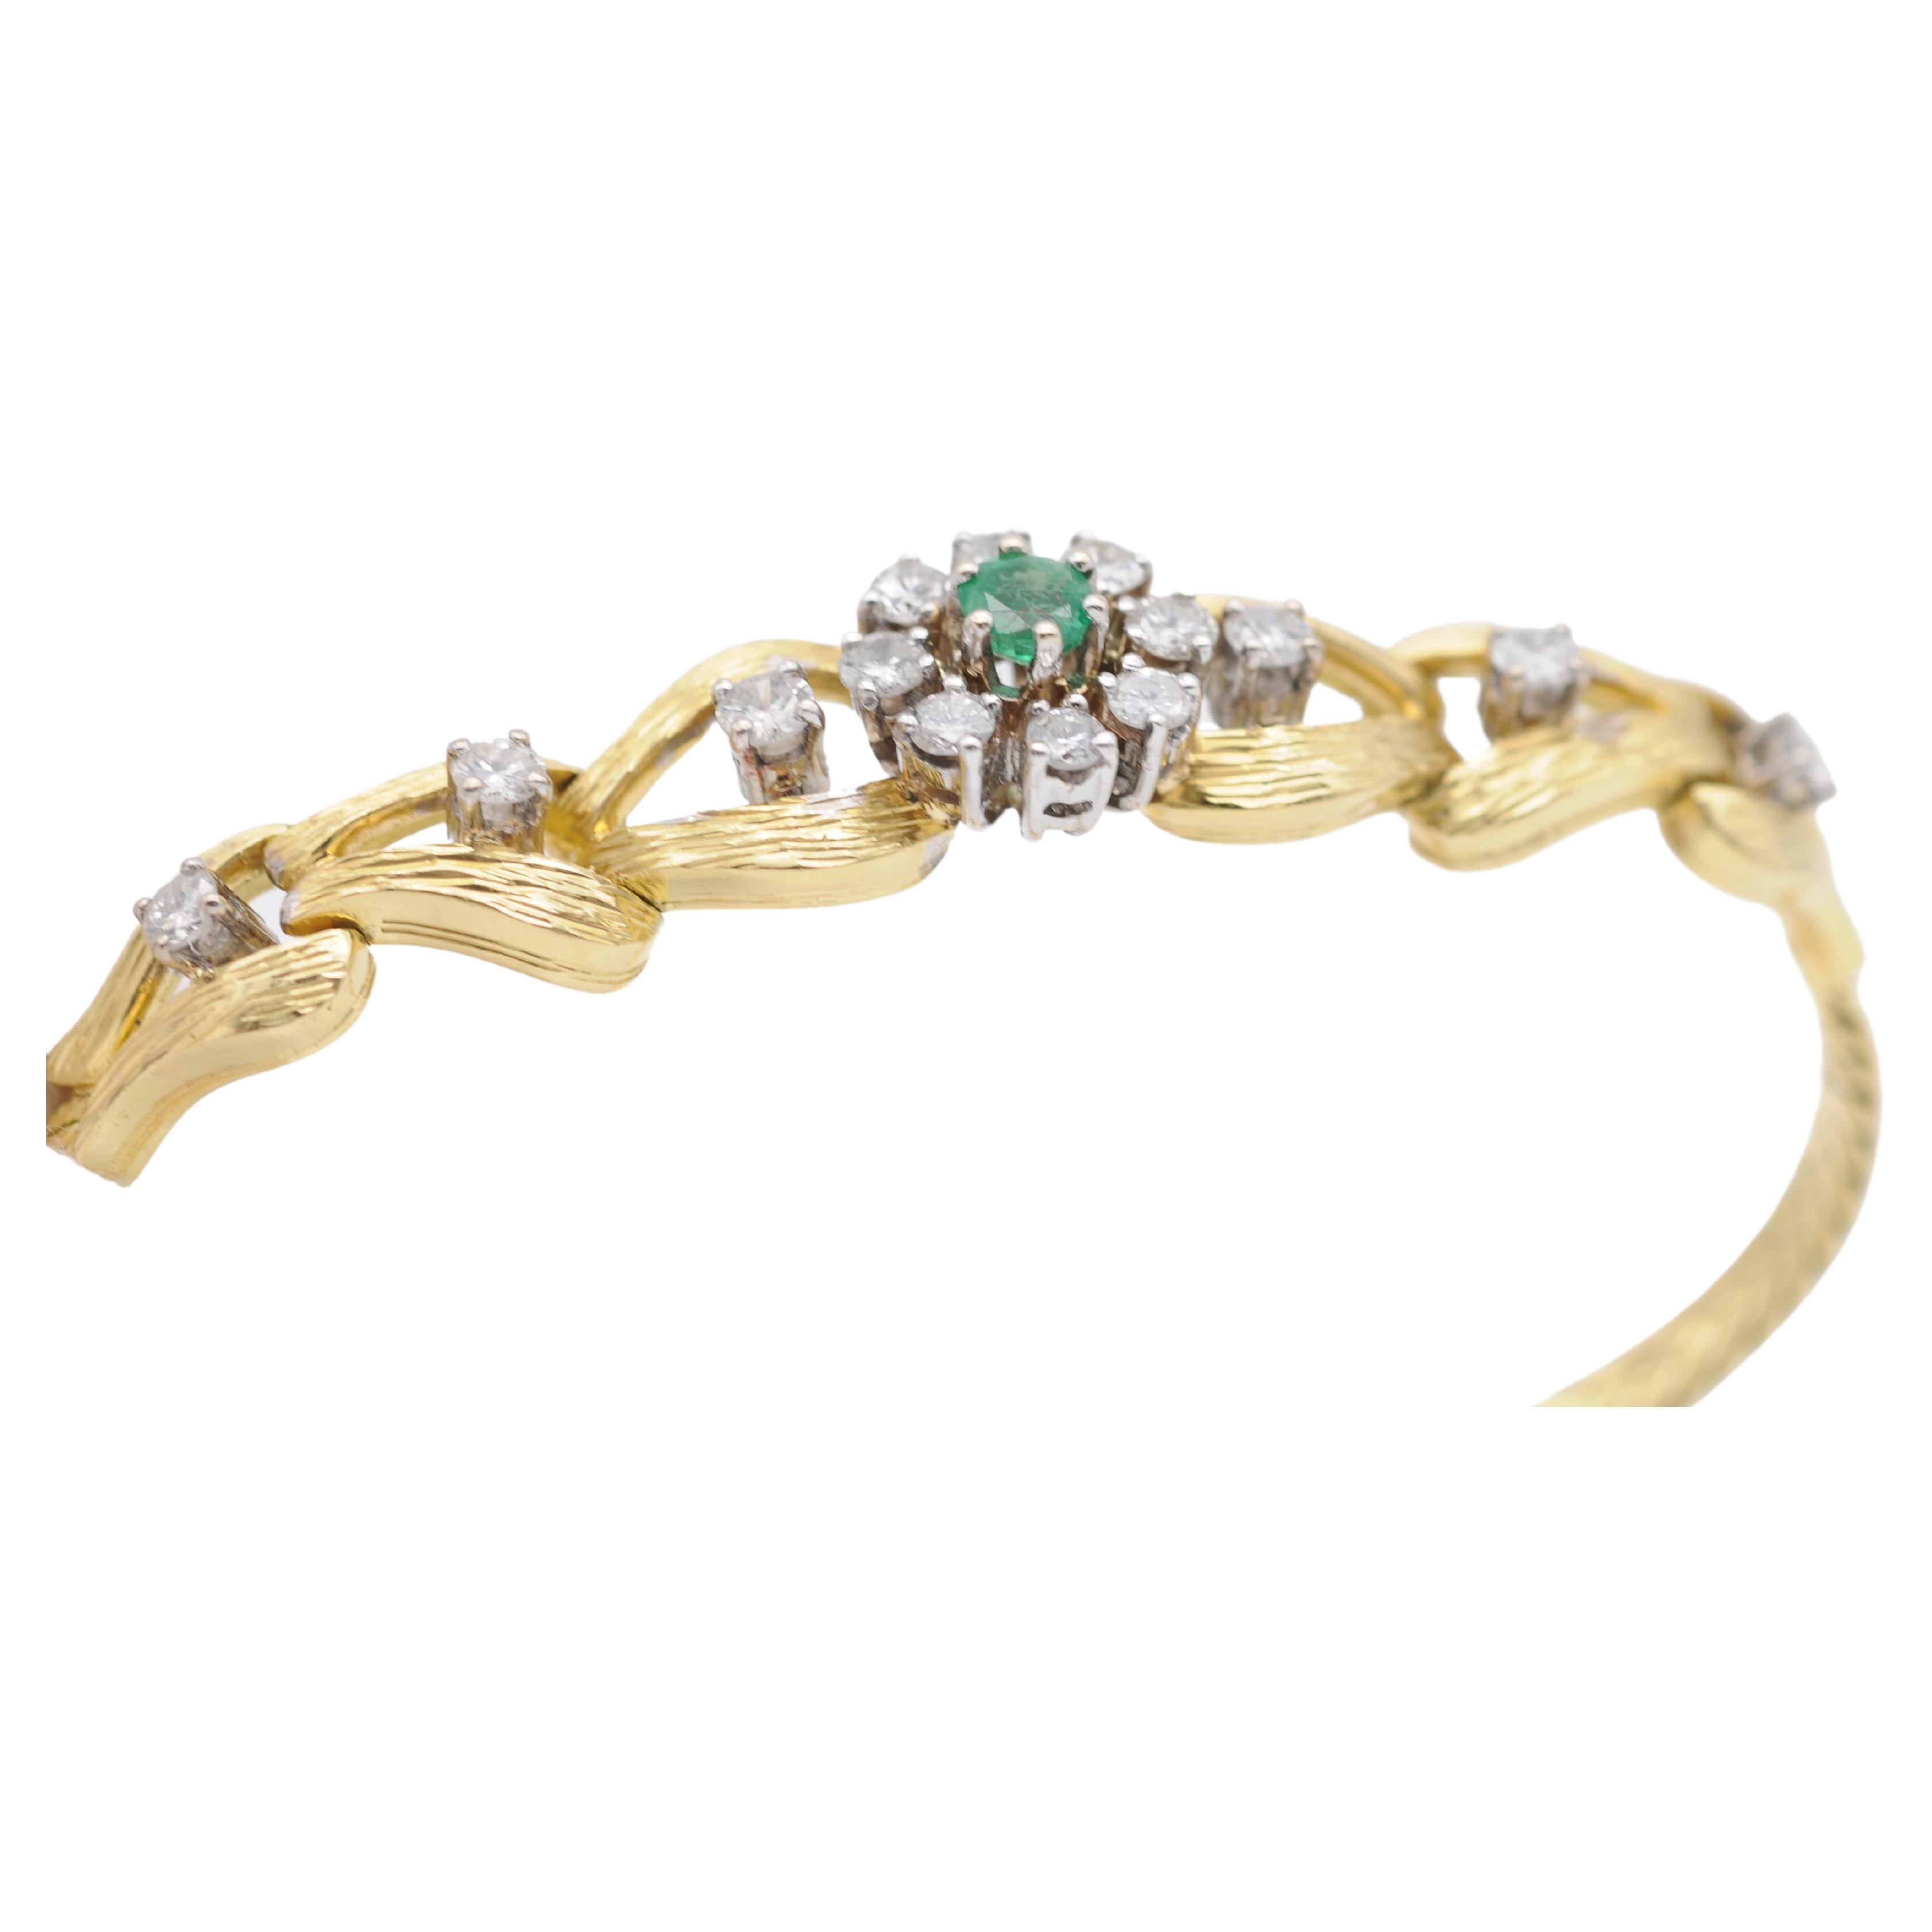 Experience the epitome of luxury and elegance with this stunning Noble 18k Gold Bracelet featuring a mesmerizing emerald stone and dazzling diamonds. This bracelet is a true work of art, boasting a timeless design that exudes sophistication and